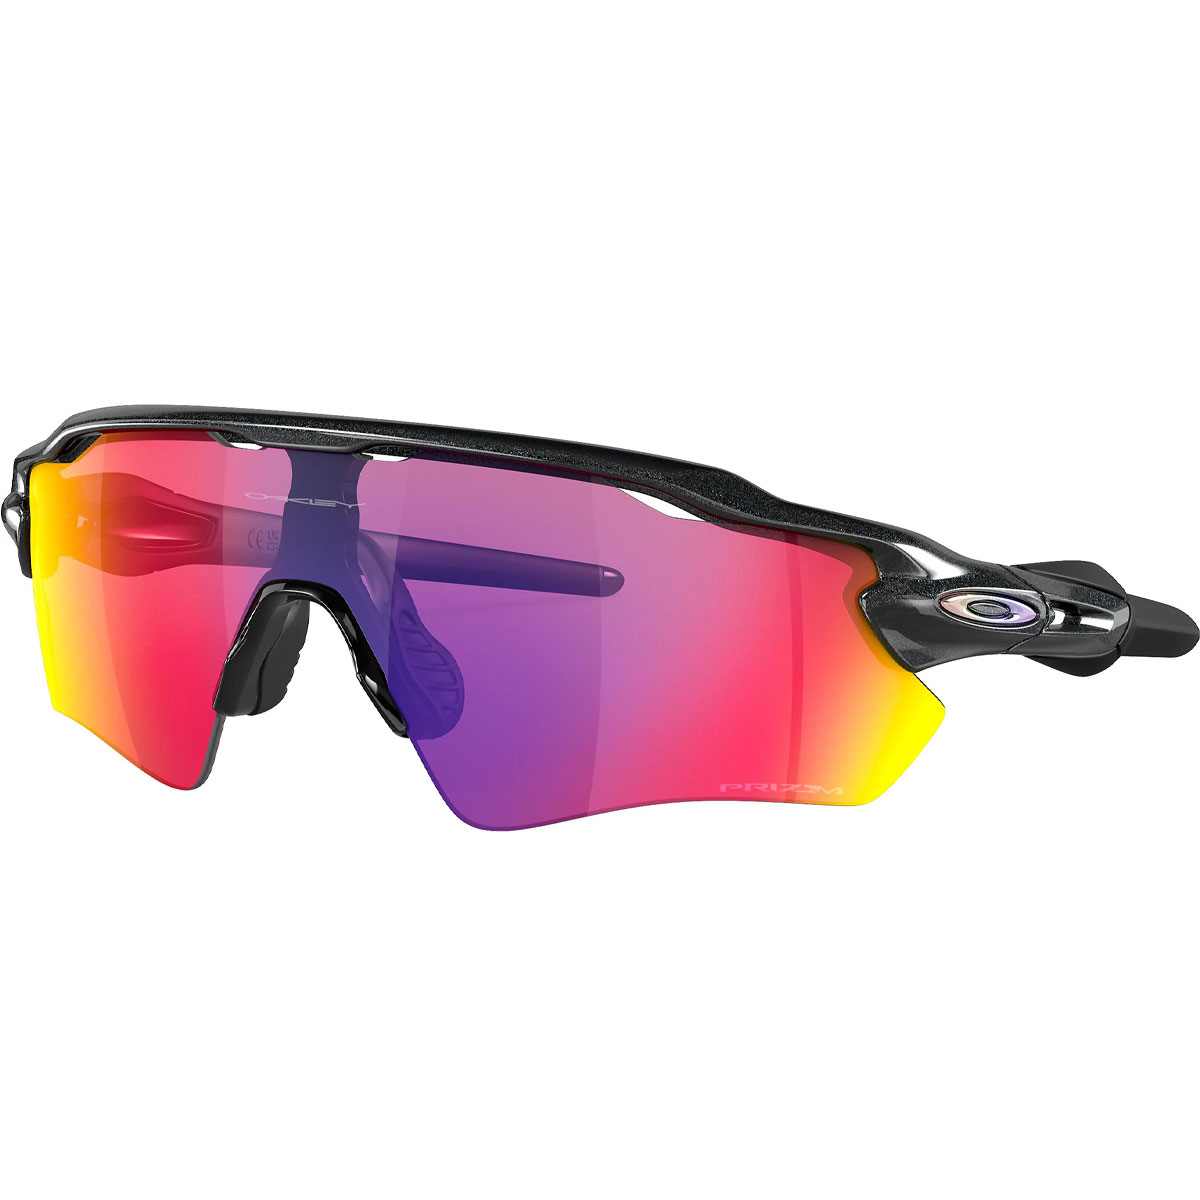 Oakley Vault, 490 Dune Rd Central Valley, NY  Men's and Women's  Sunglasses, Goggles, & Apparel